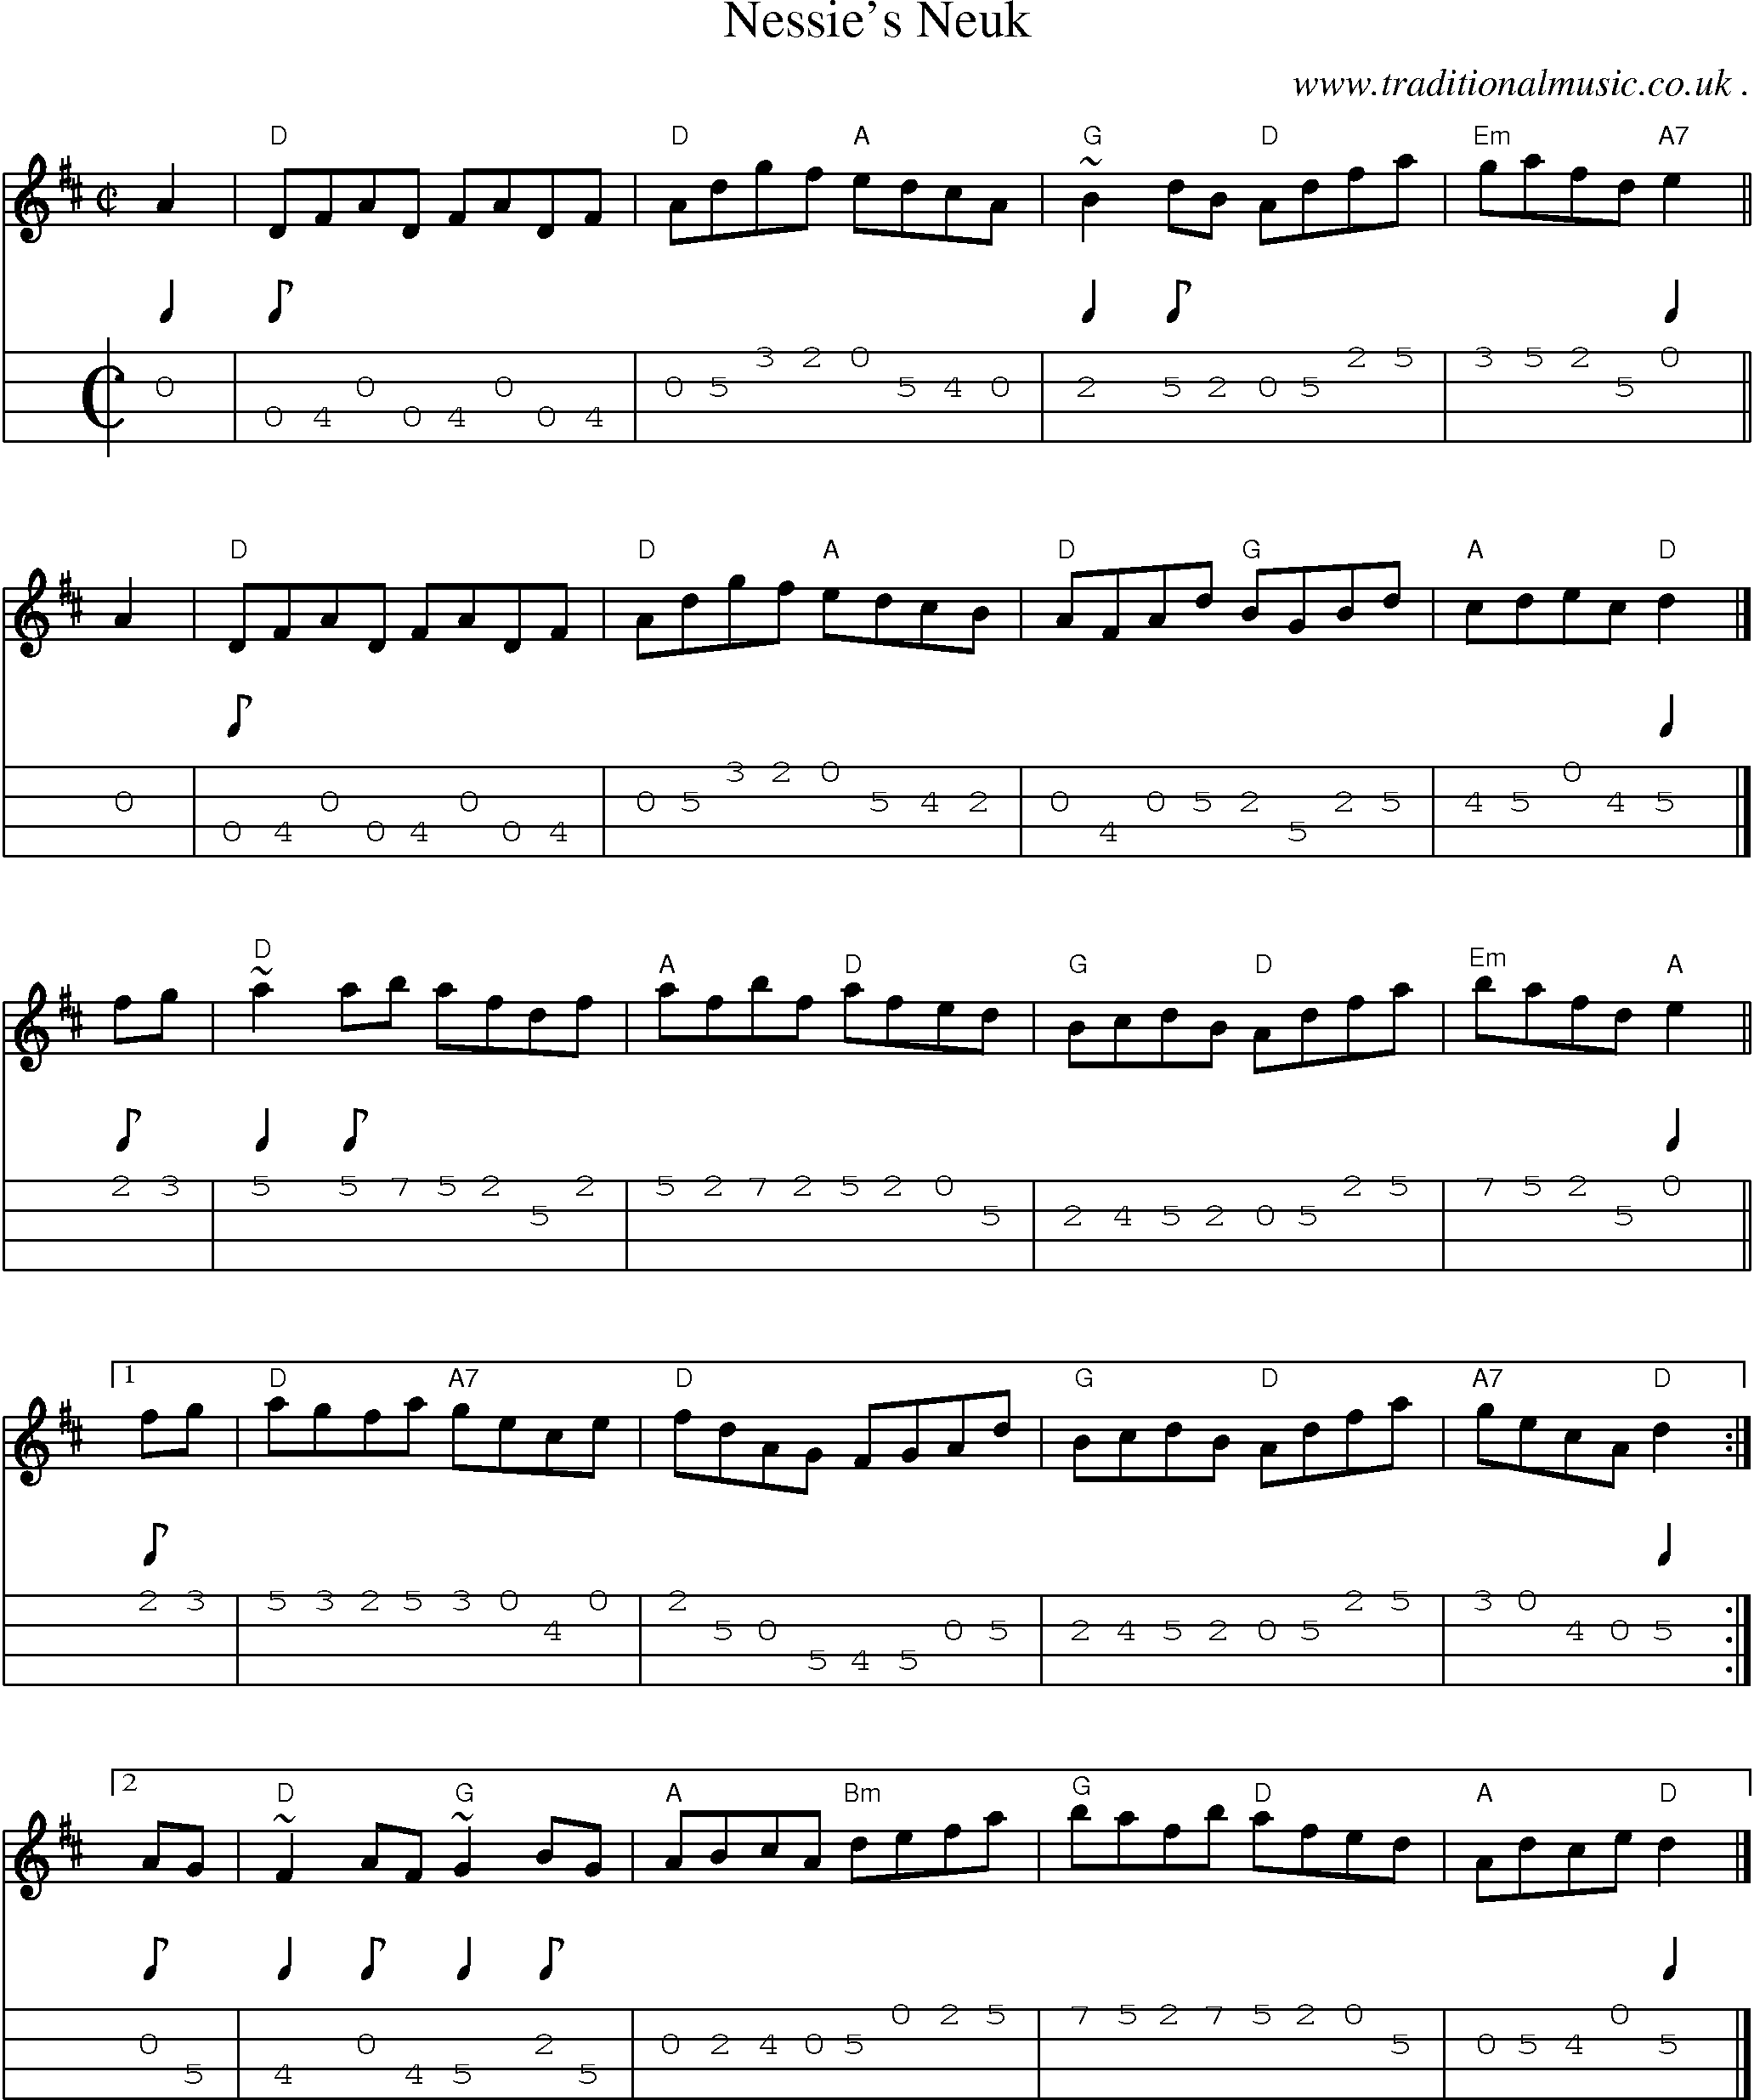 Sheet-music  score, Chords and Mandolin Tabs for Nessies Neuk